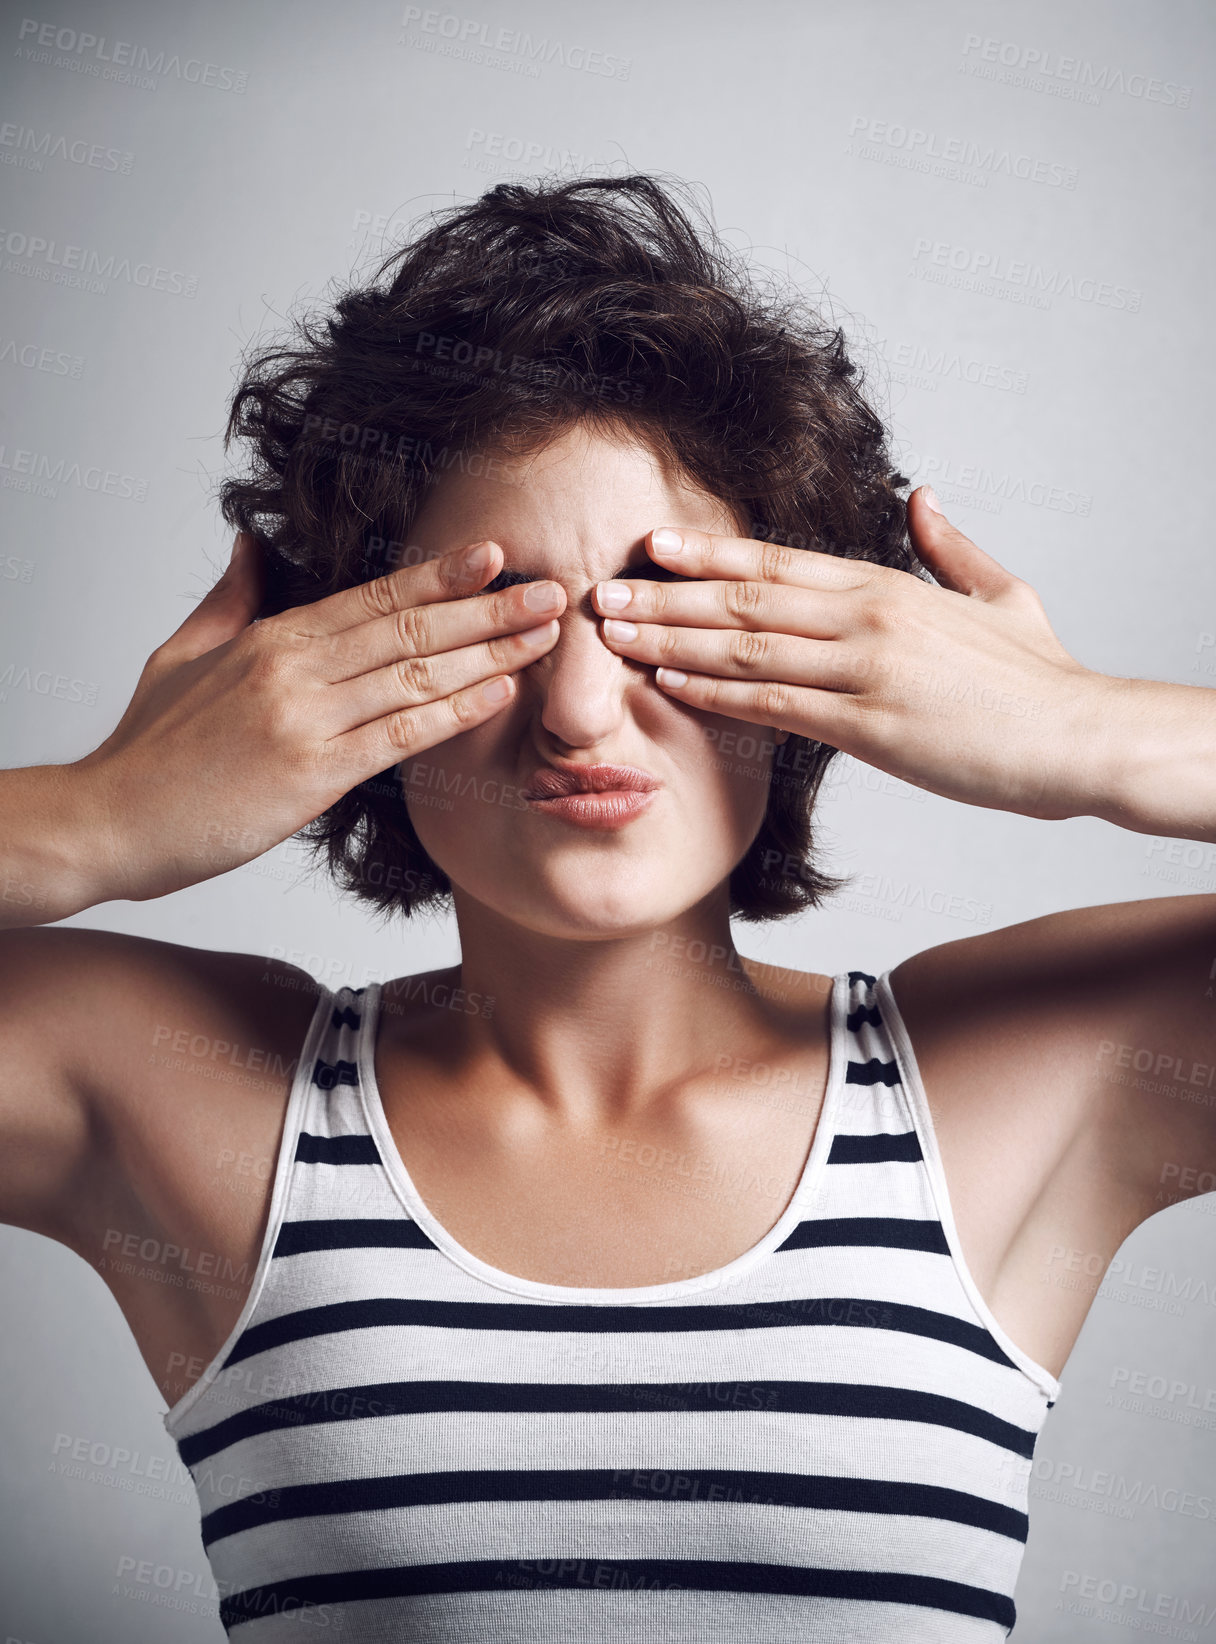 Buy stock photo Studio shot of an attractive young woman covering her eyes with her hands against a grey background